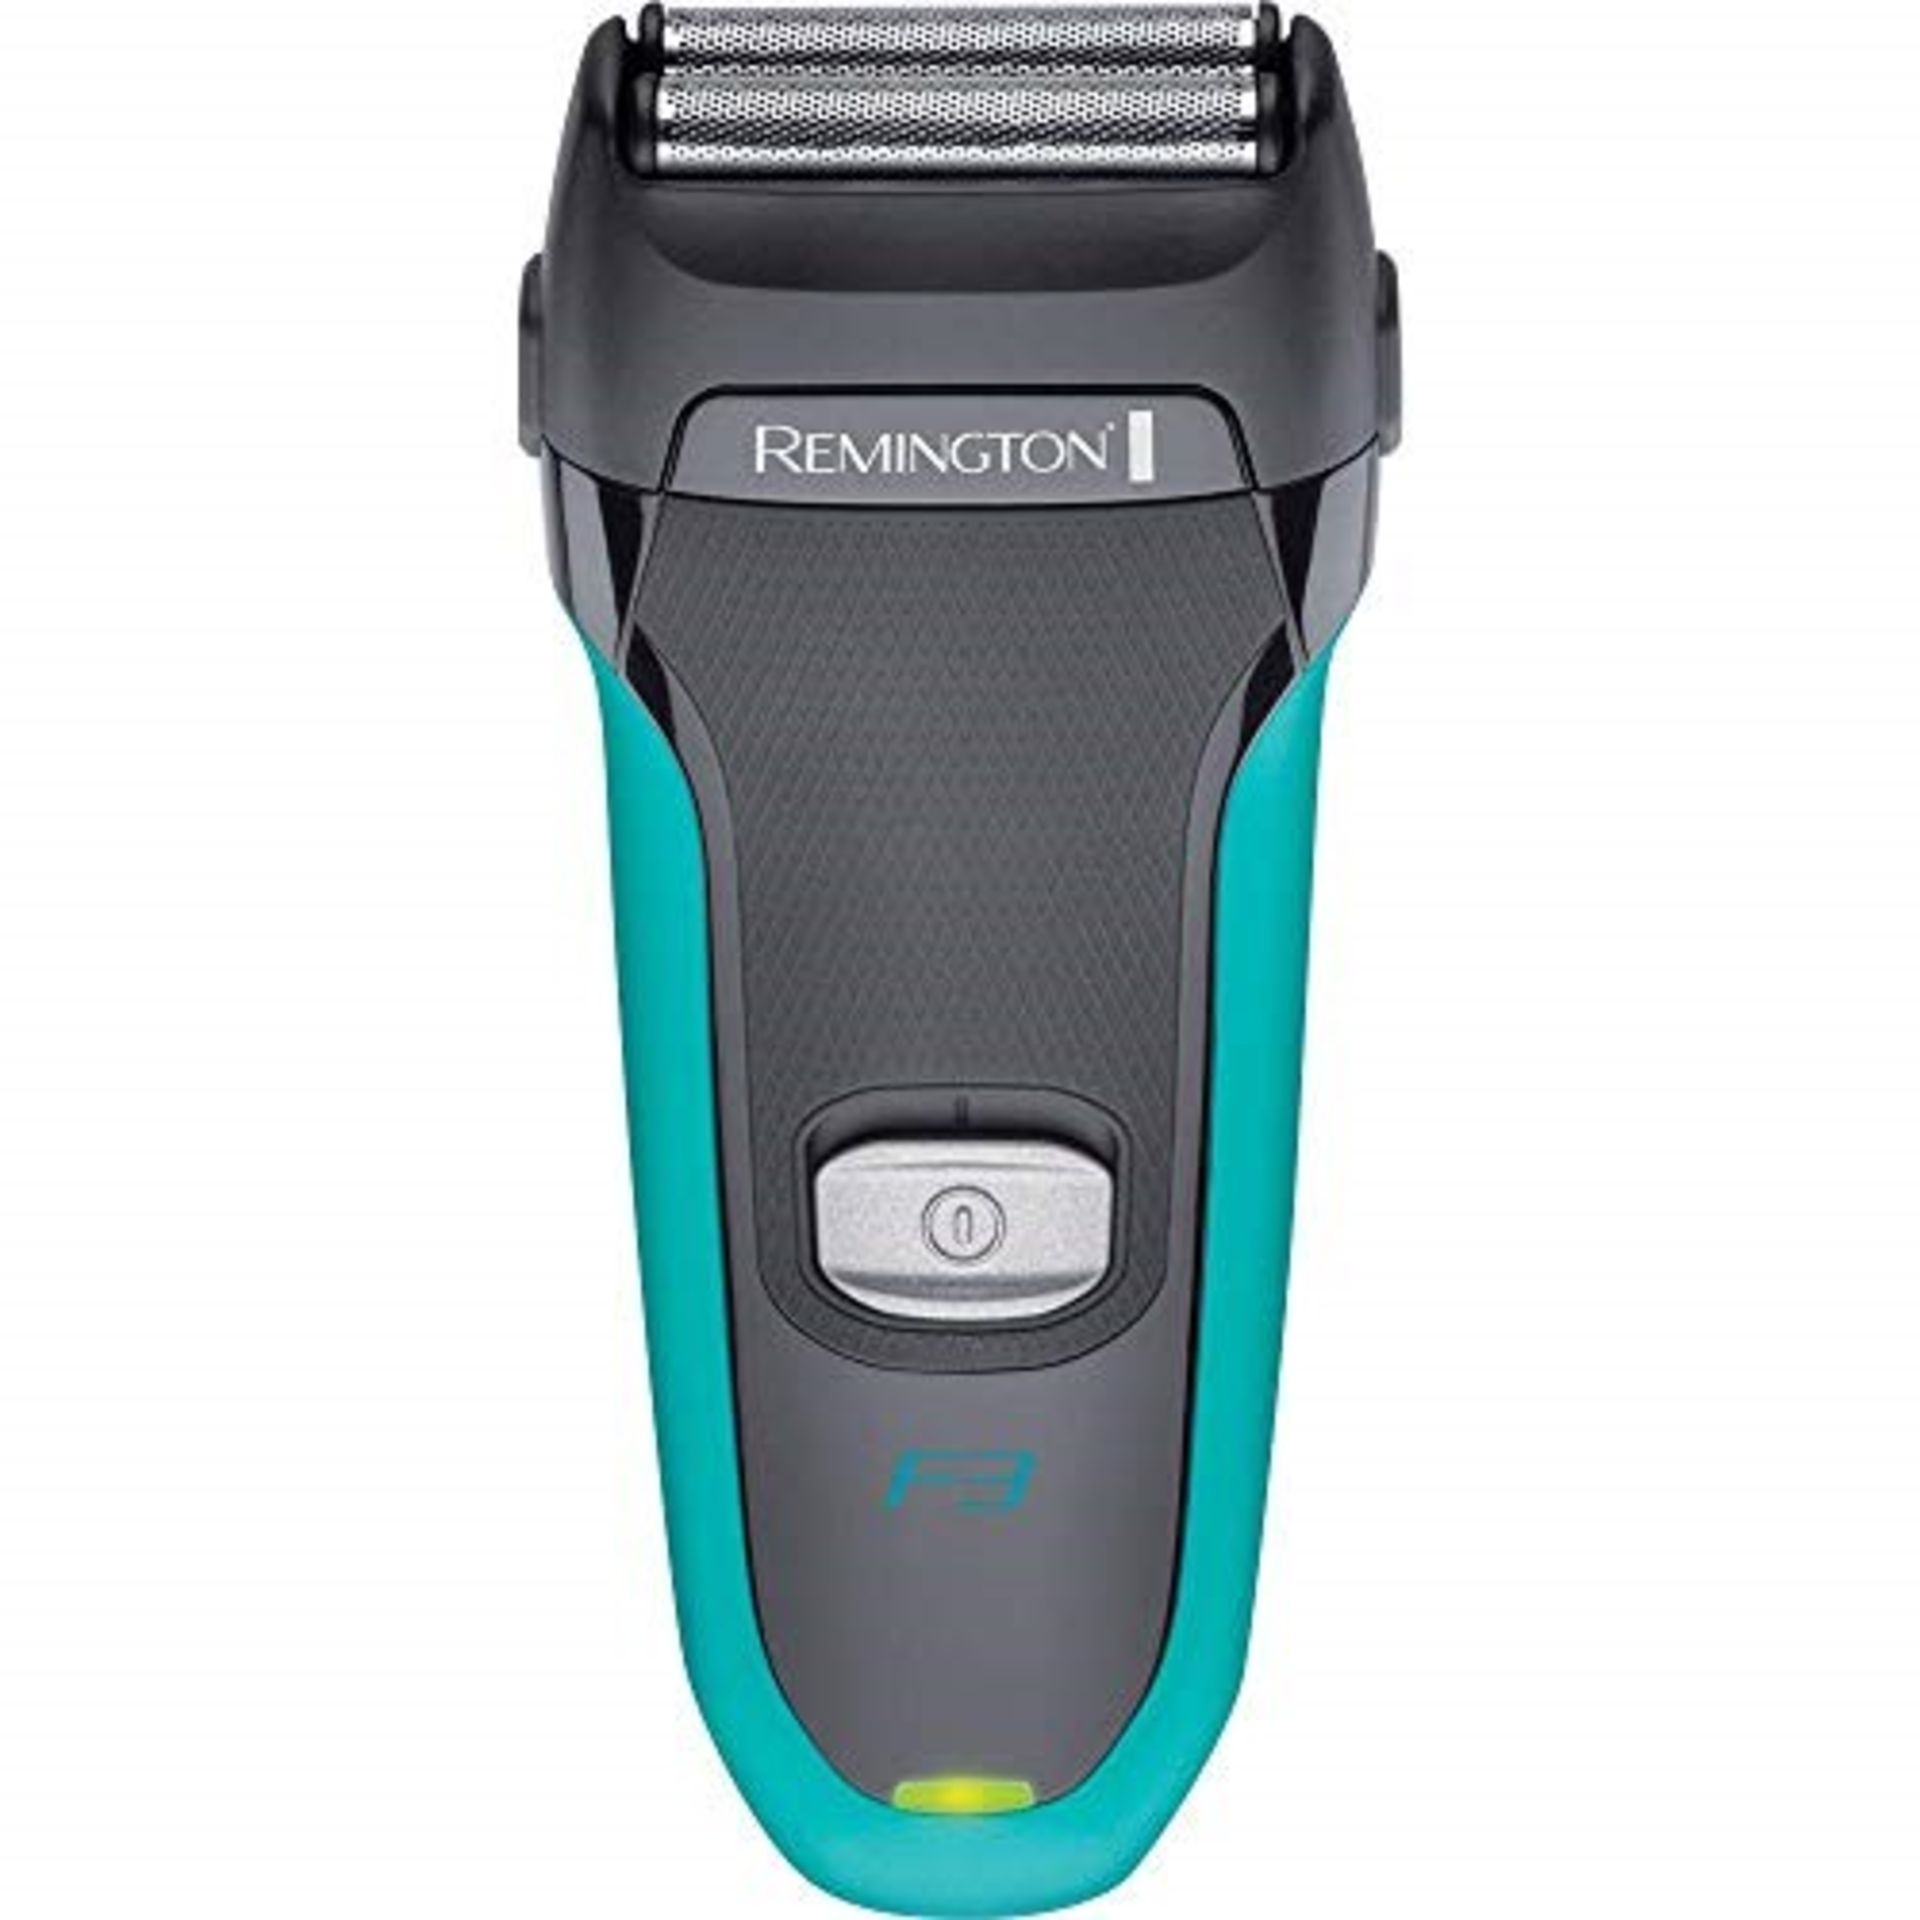 Remington F3 Style Series Electric Shaver with P